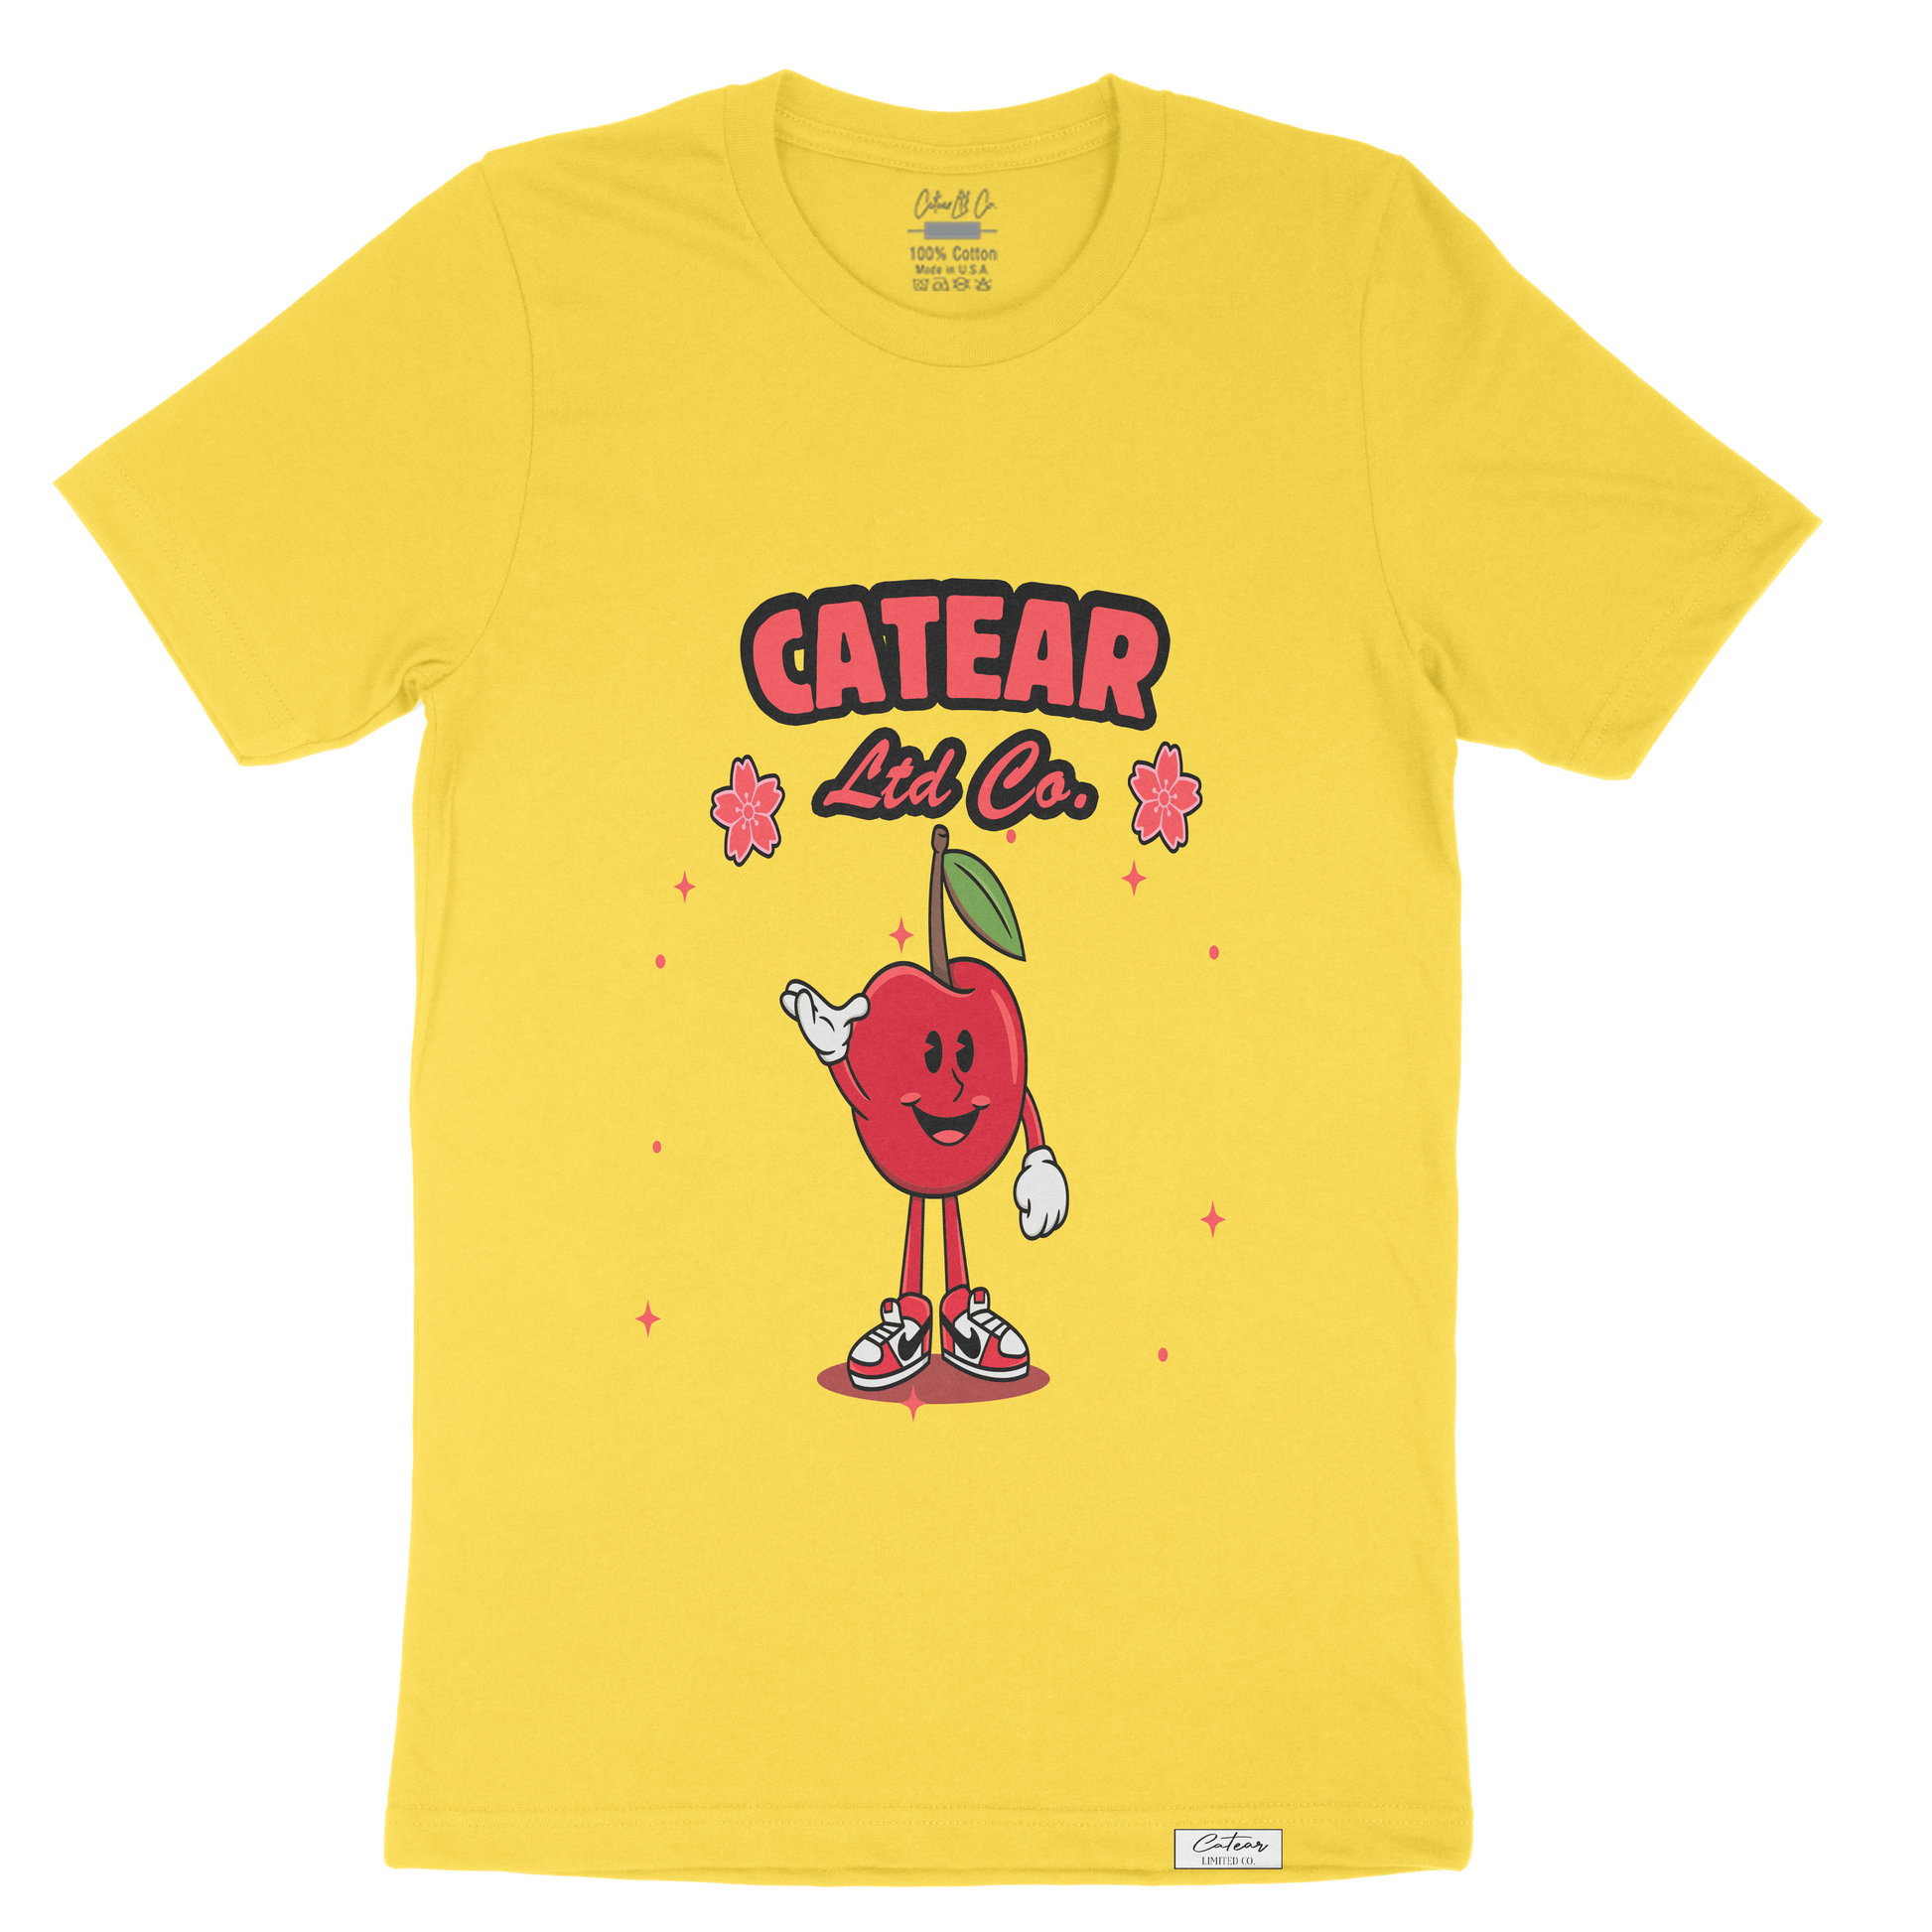 Unisex yellow color tee with hand-drawn cherry mascot screen printed on the front, woven label on bottom left 100% Cotton. Relaxed fit & great feel.